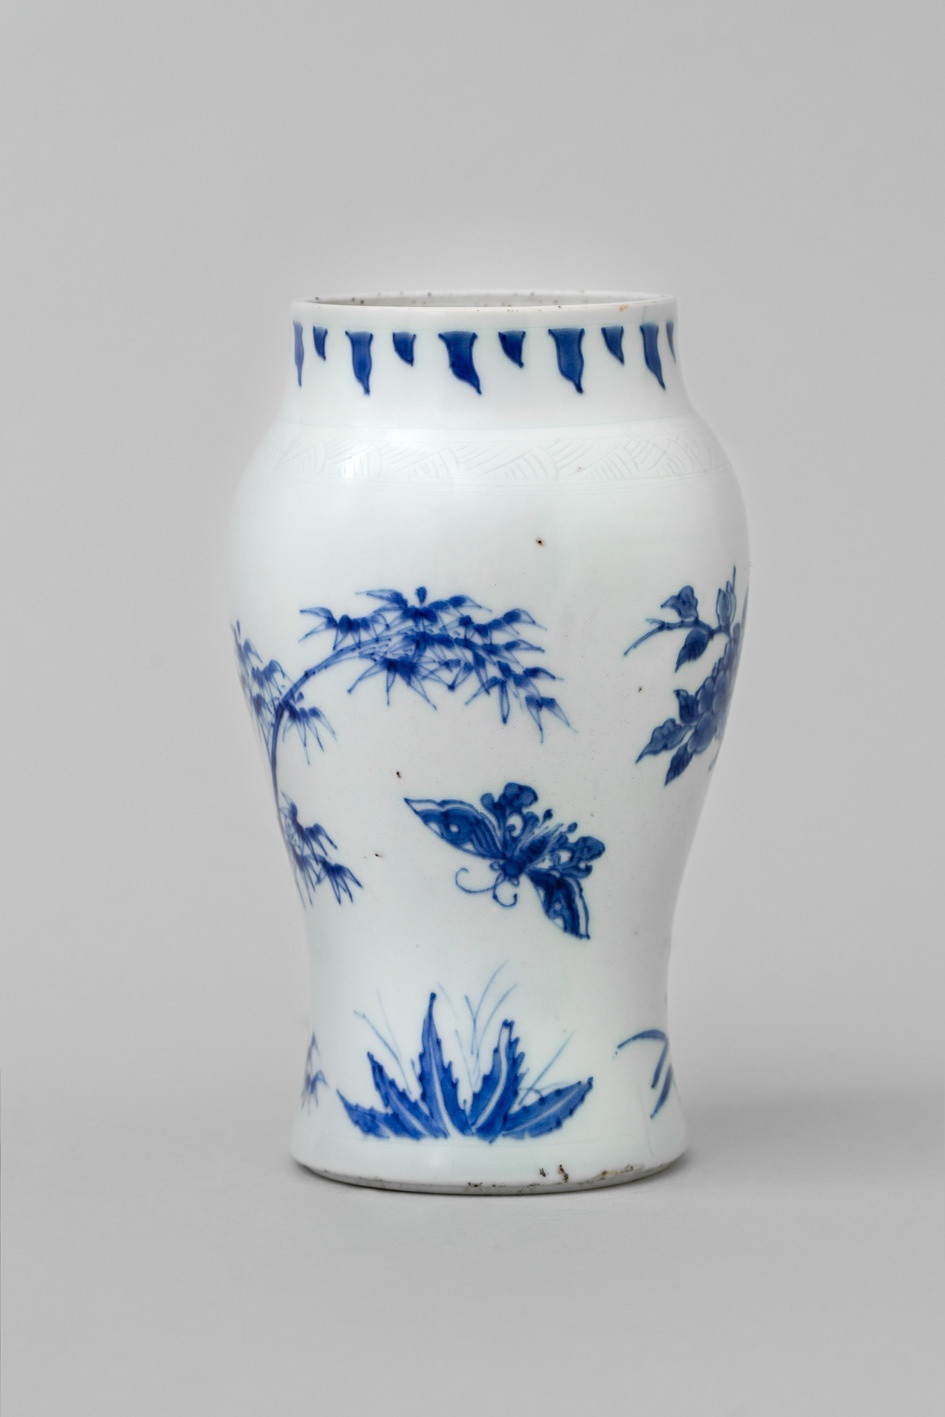 23 Fabulous Chinese Porcelain Vase 2023 free download chinese porcelain vase of a chinese transitional blue and white vase shunzhi 1644 1661 with regard to a chinese transitional blue and white vase